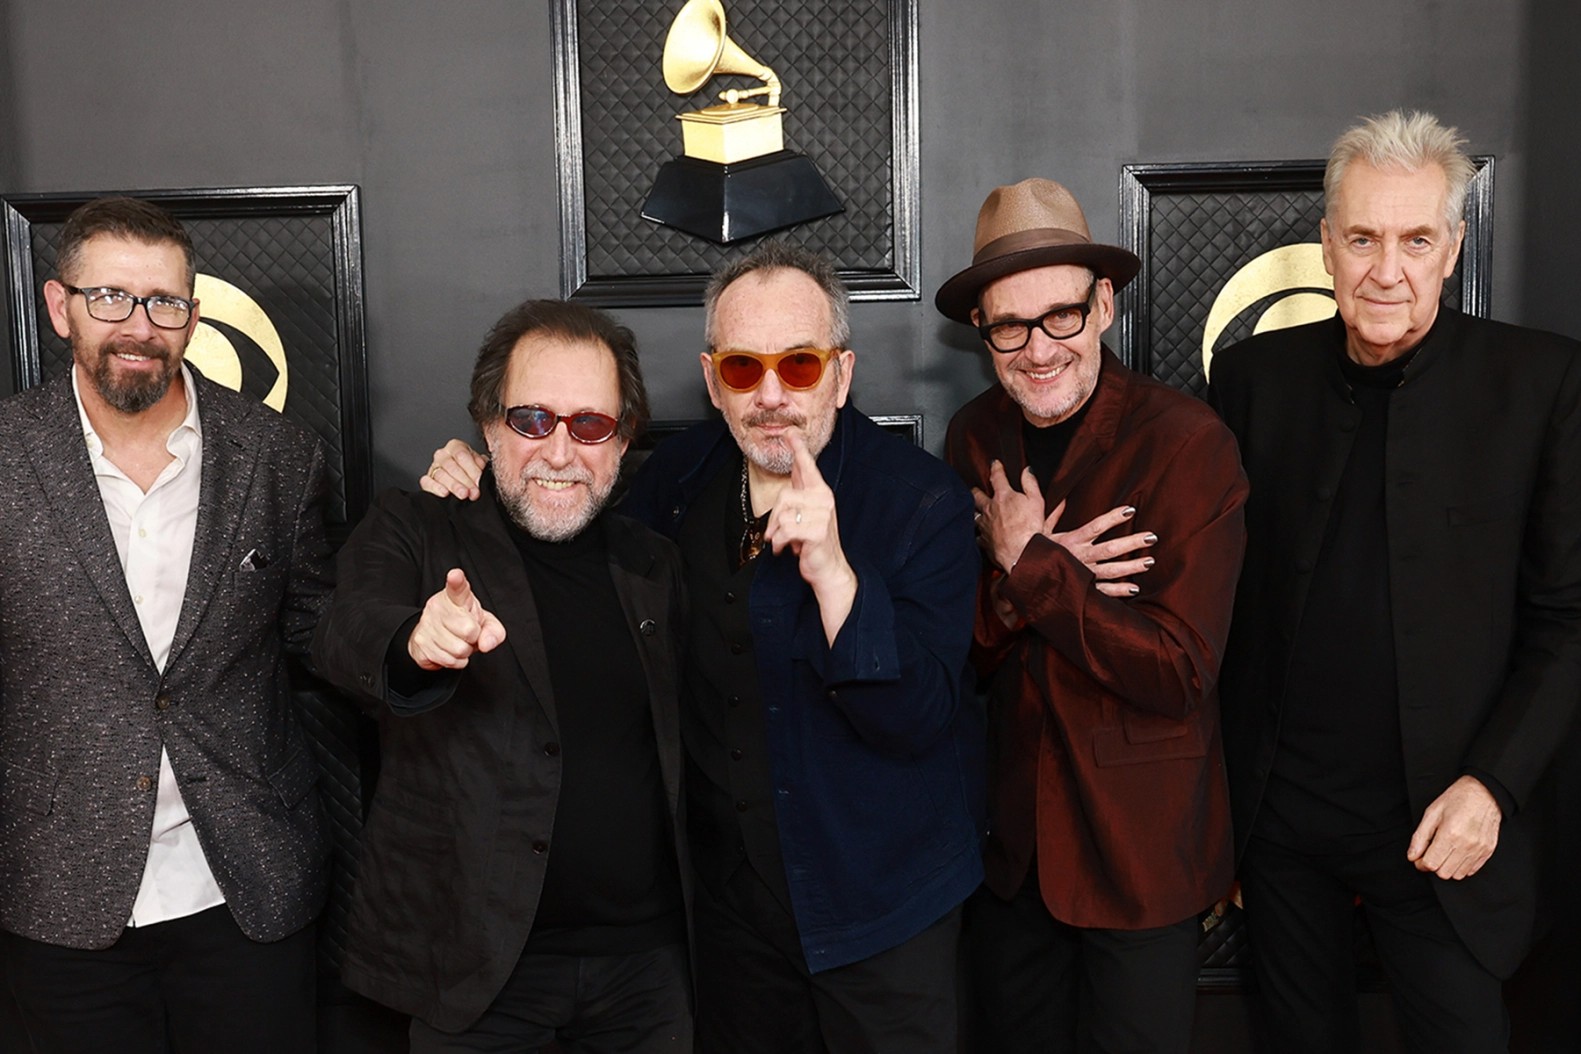 Elvis Costello & The Imposters, photo by Matt Winkelmeyer (Getty Images)